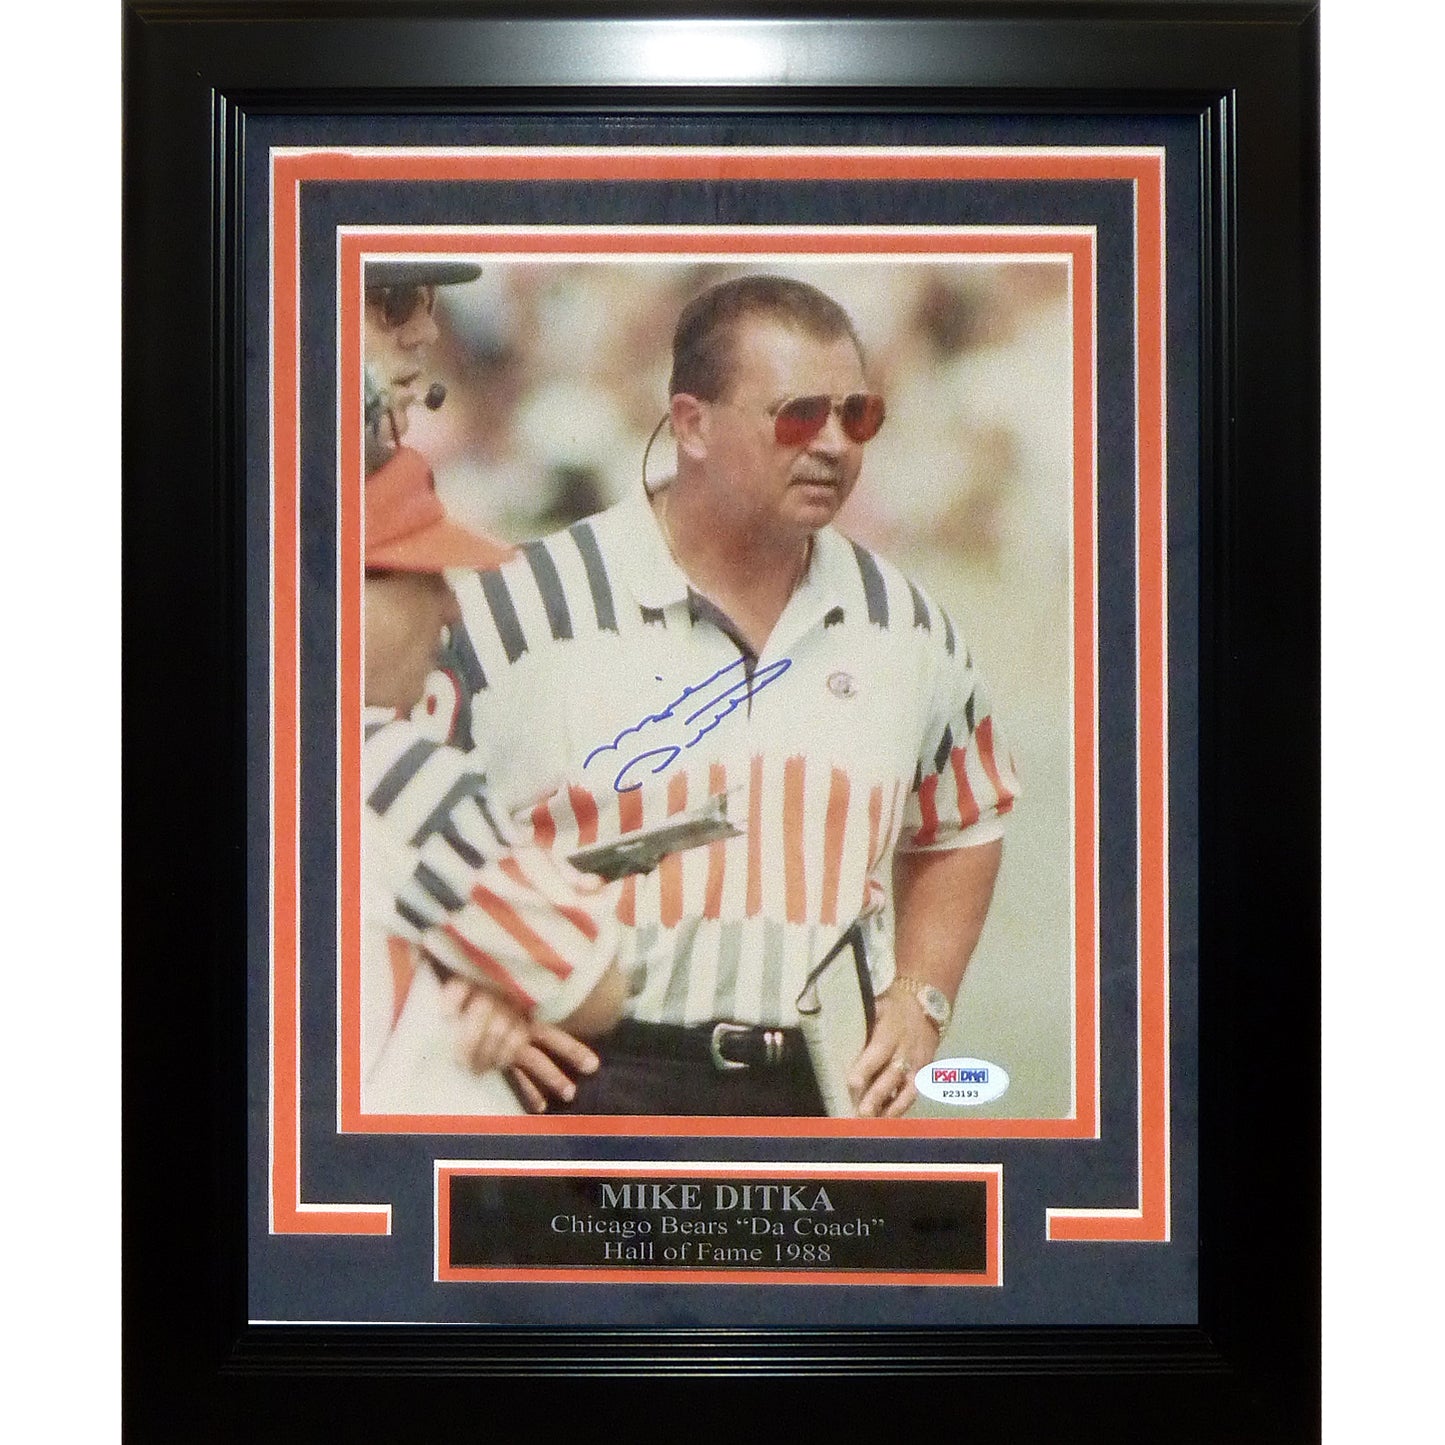 Mike Ditka Autographed Chicago Bears (Coaching) Deluxe Framed 8x10 Photo – PSADNA